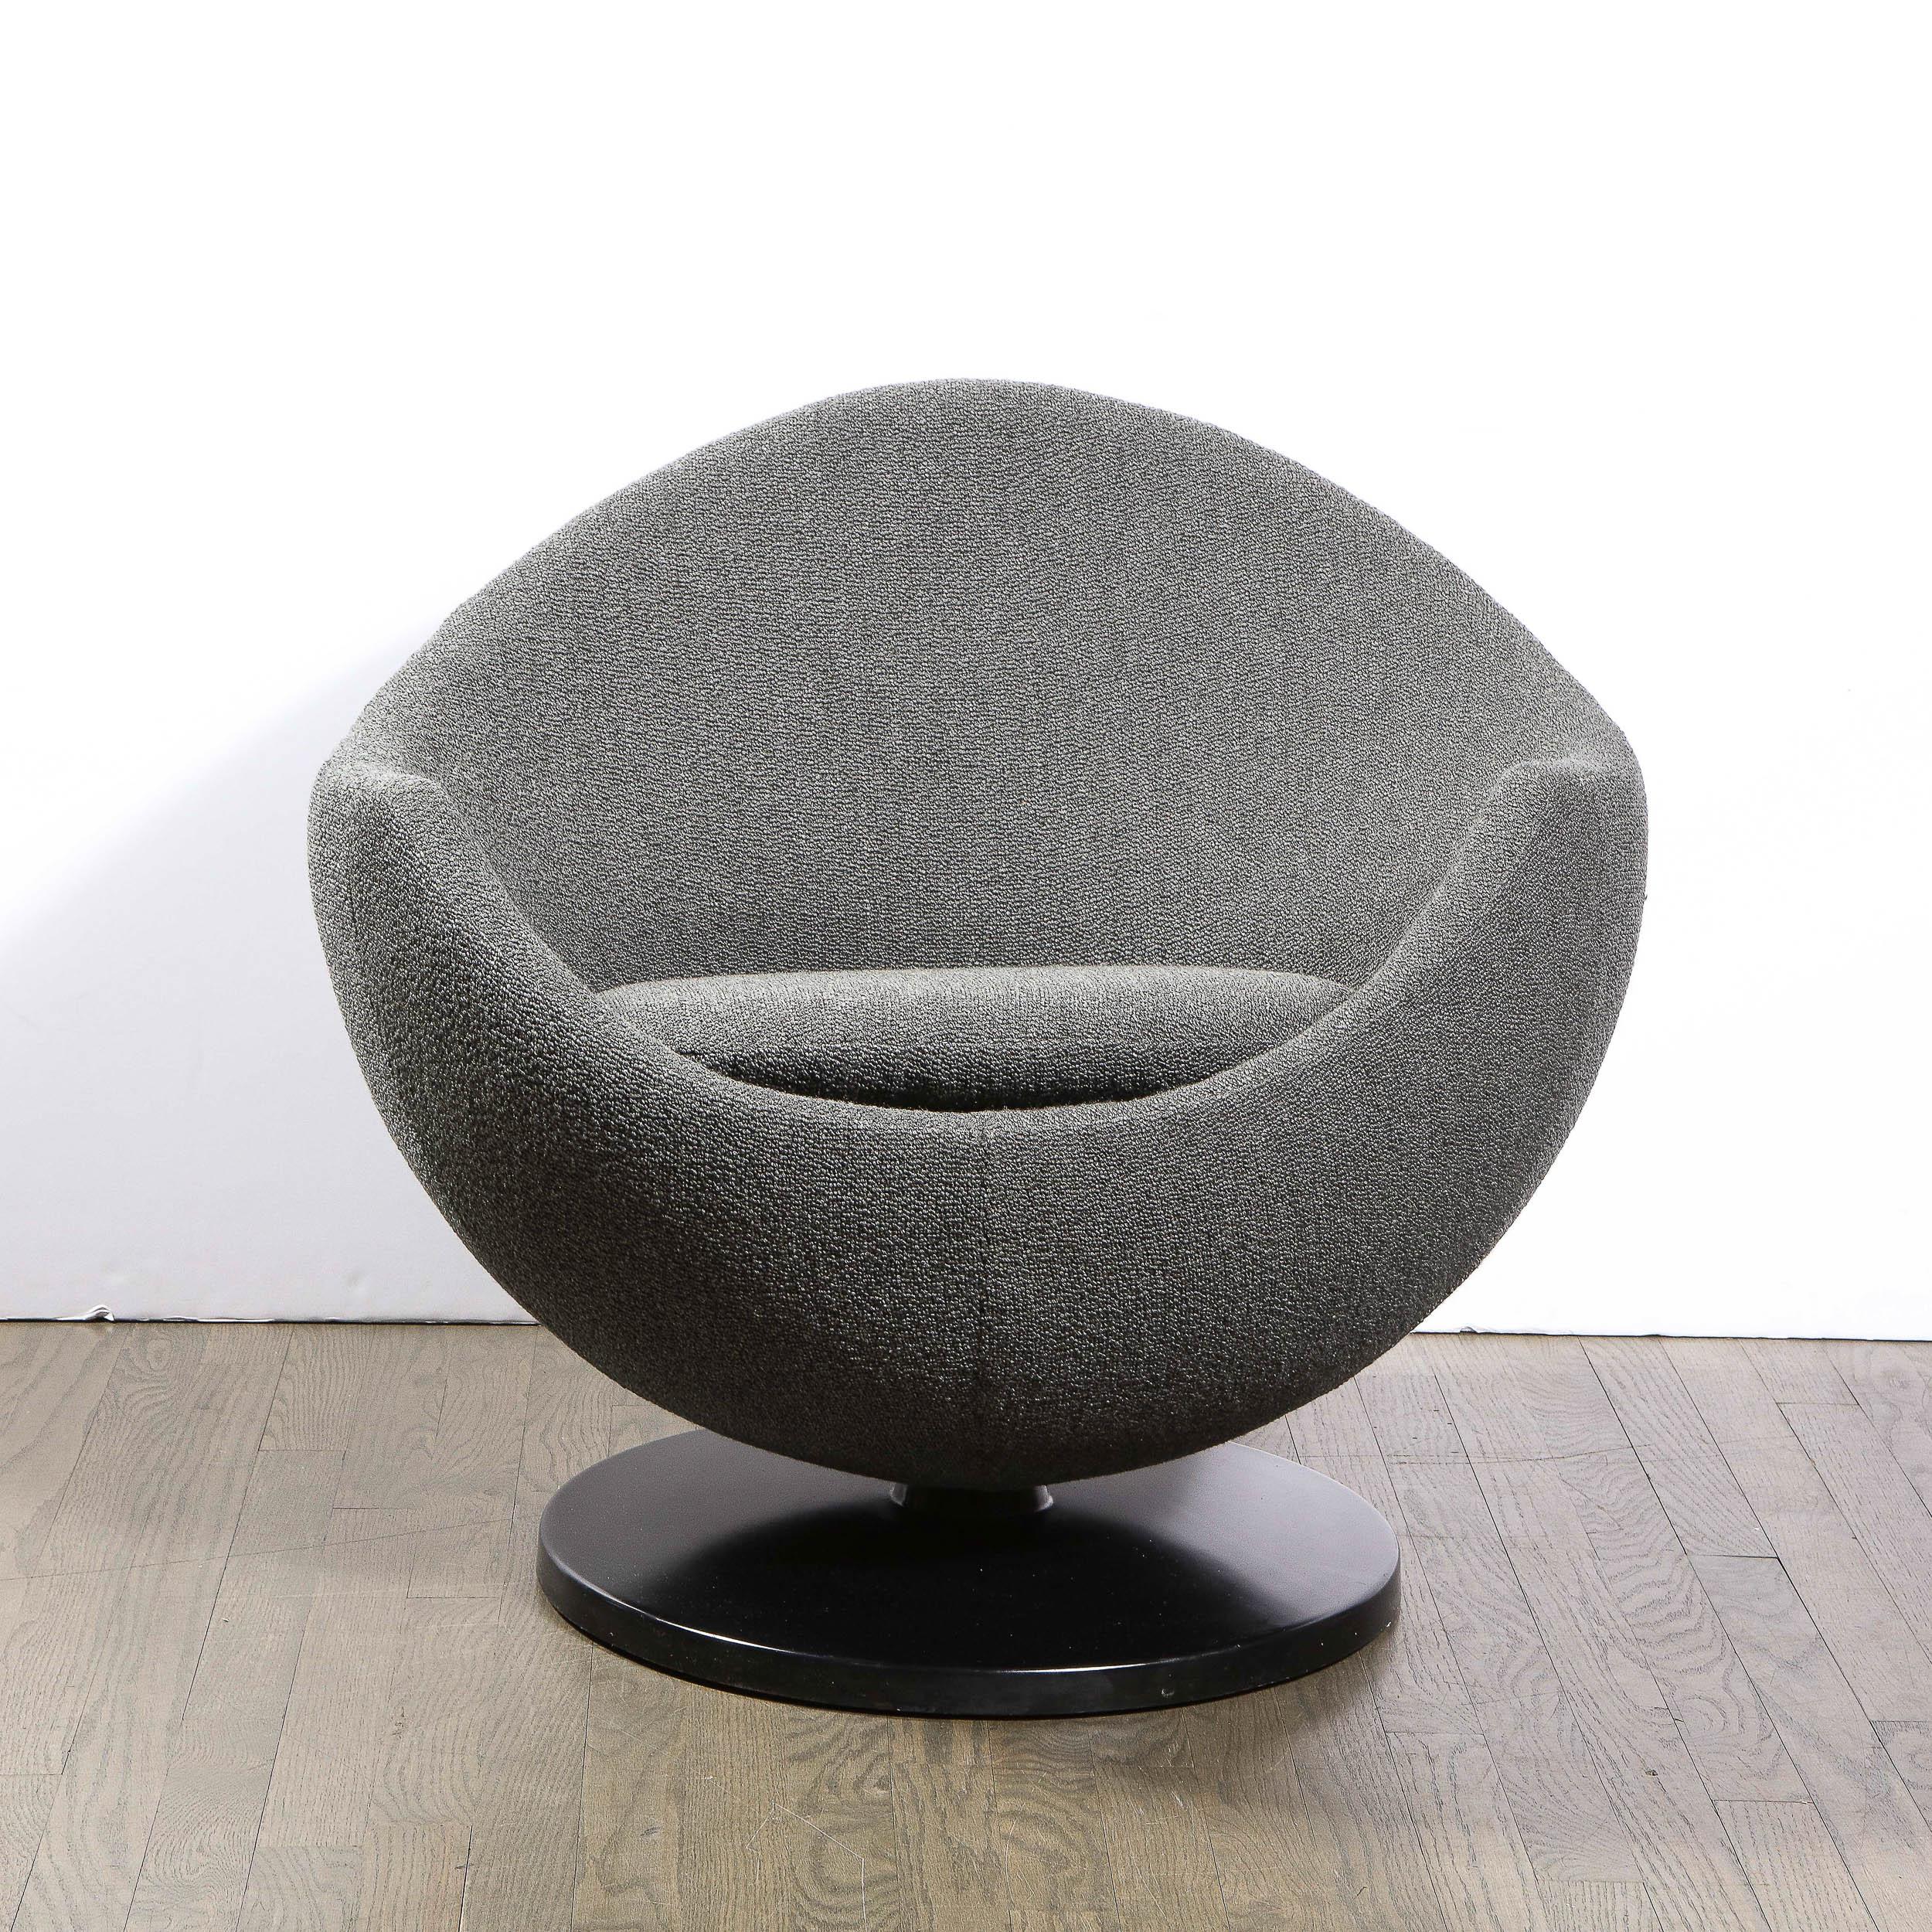 This stunning Mid-Century Modern swivel chair was realized in the United States circa 1960. Sitting on a subtly convex black enamel base, this curvilinear chair offers a graphic form with a rounded back; dramatically concave arms; and a peaked back-